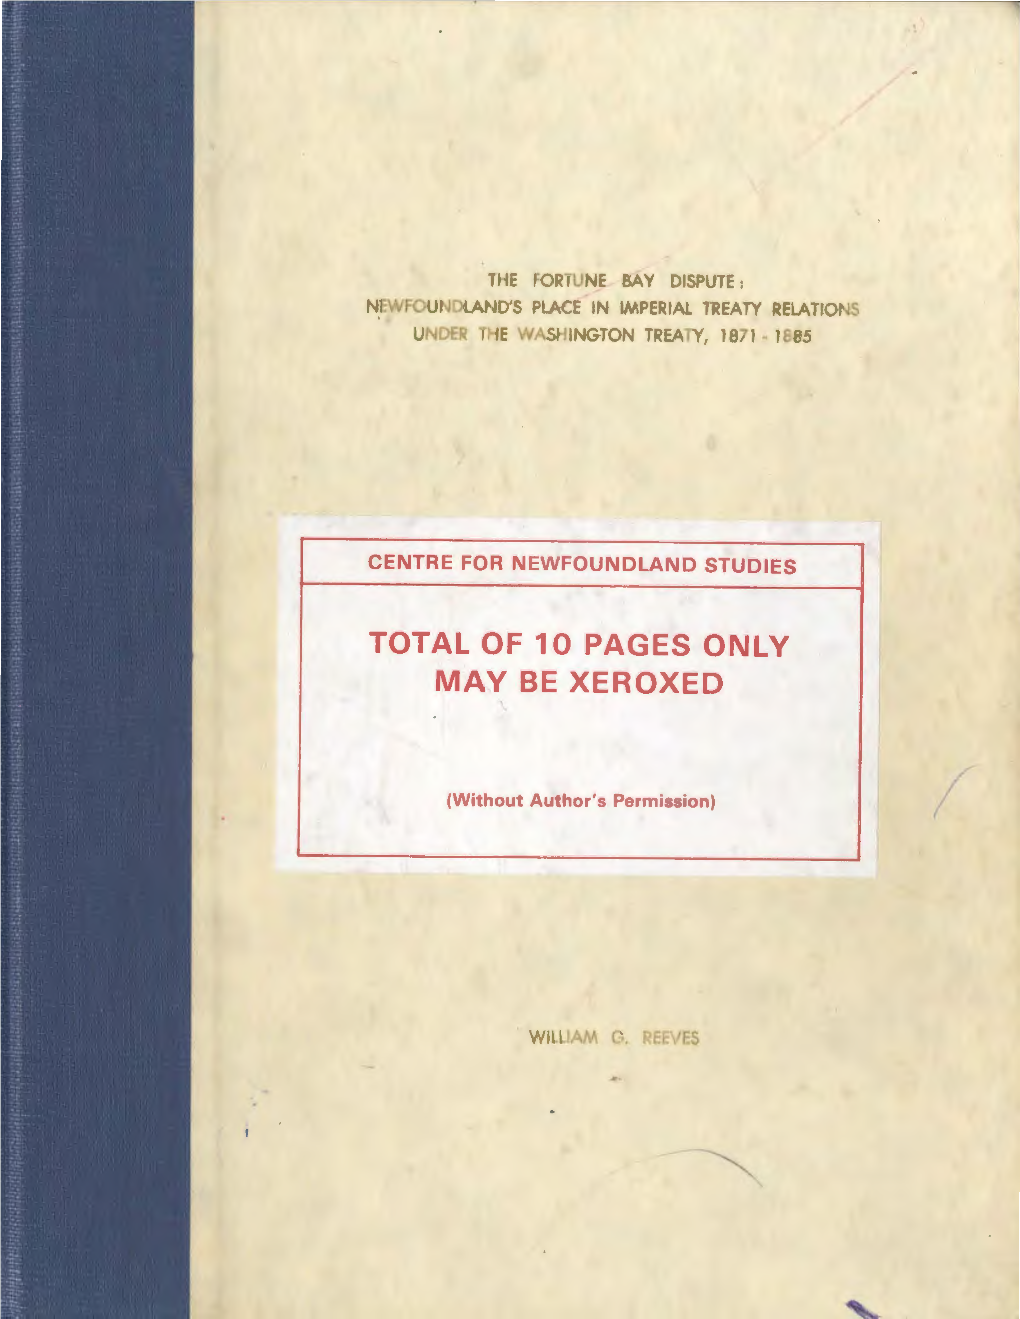 Total of 10 Pages Only May Be Xeroxed